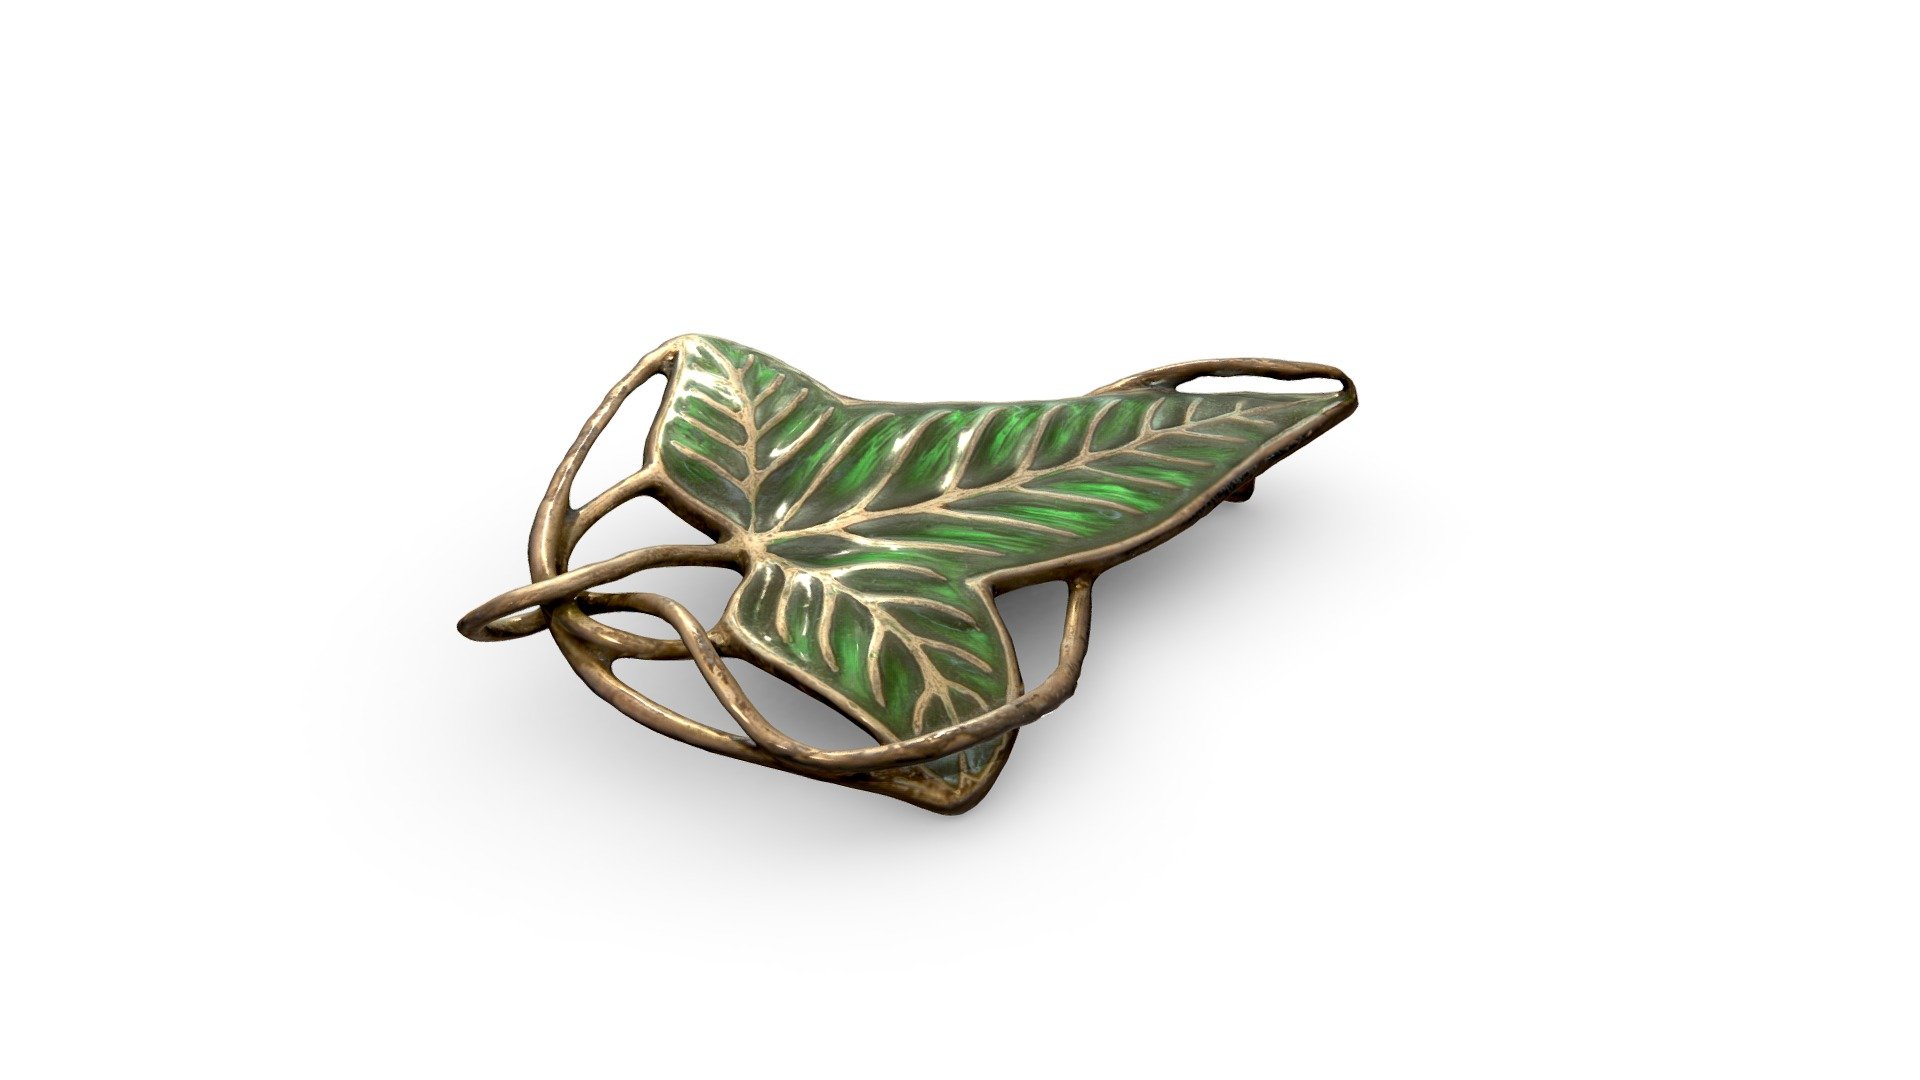 Photogrammetry Model:


HighPoly reconstruction of LOTR merchandise product created with Agisoft MetaShape
Includes realistic damaged-metal texture and refined PBR-maps
Suitable for games and fan-art visualisations
 - Elven Leaf Brooch (LOTR) - Download Free 3D model by B/W Productshots (@bw-productshots) 3d model